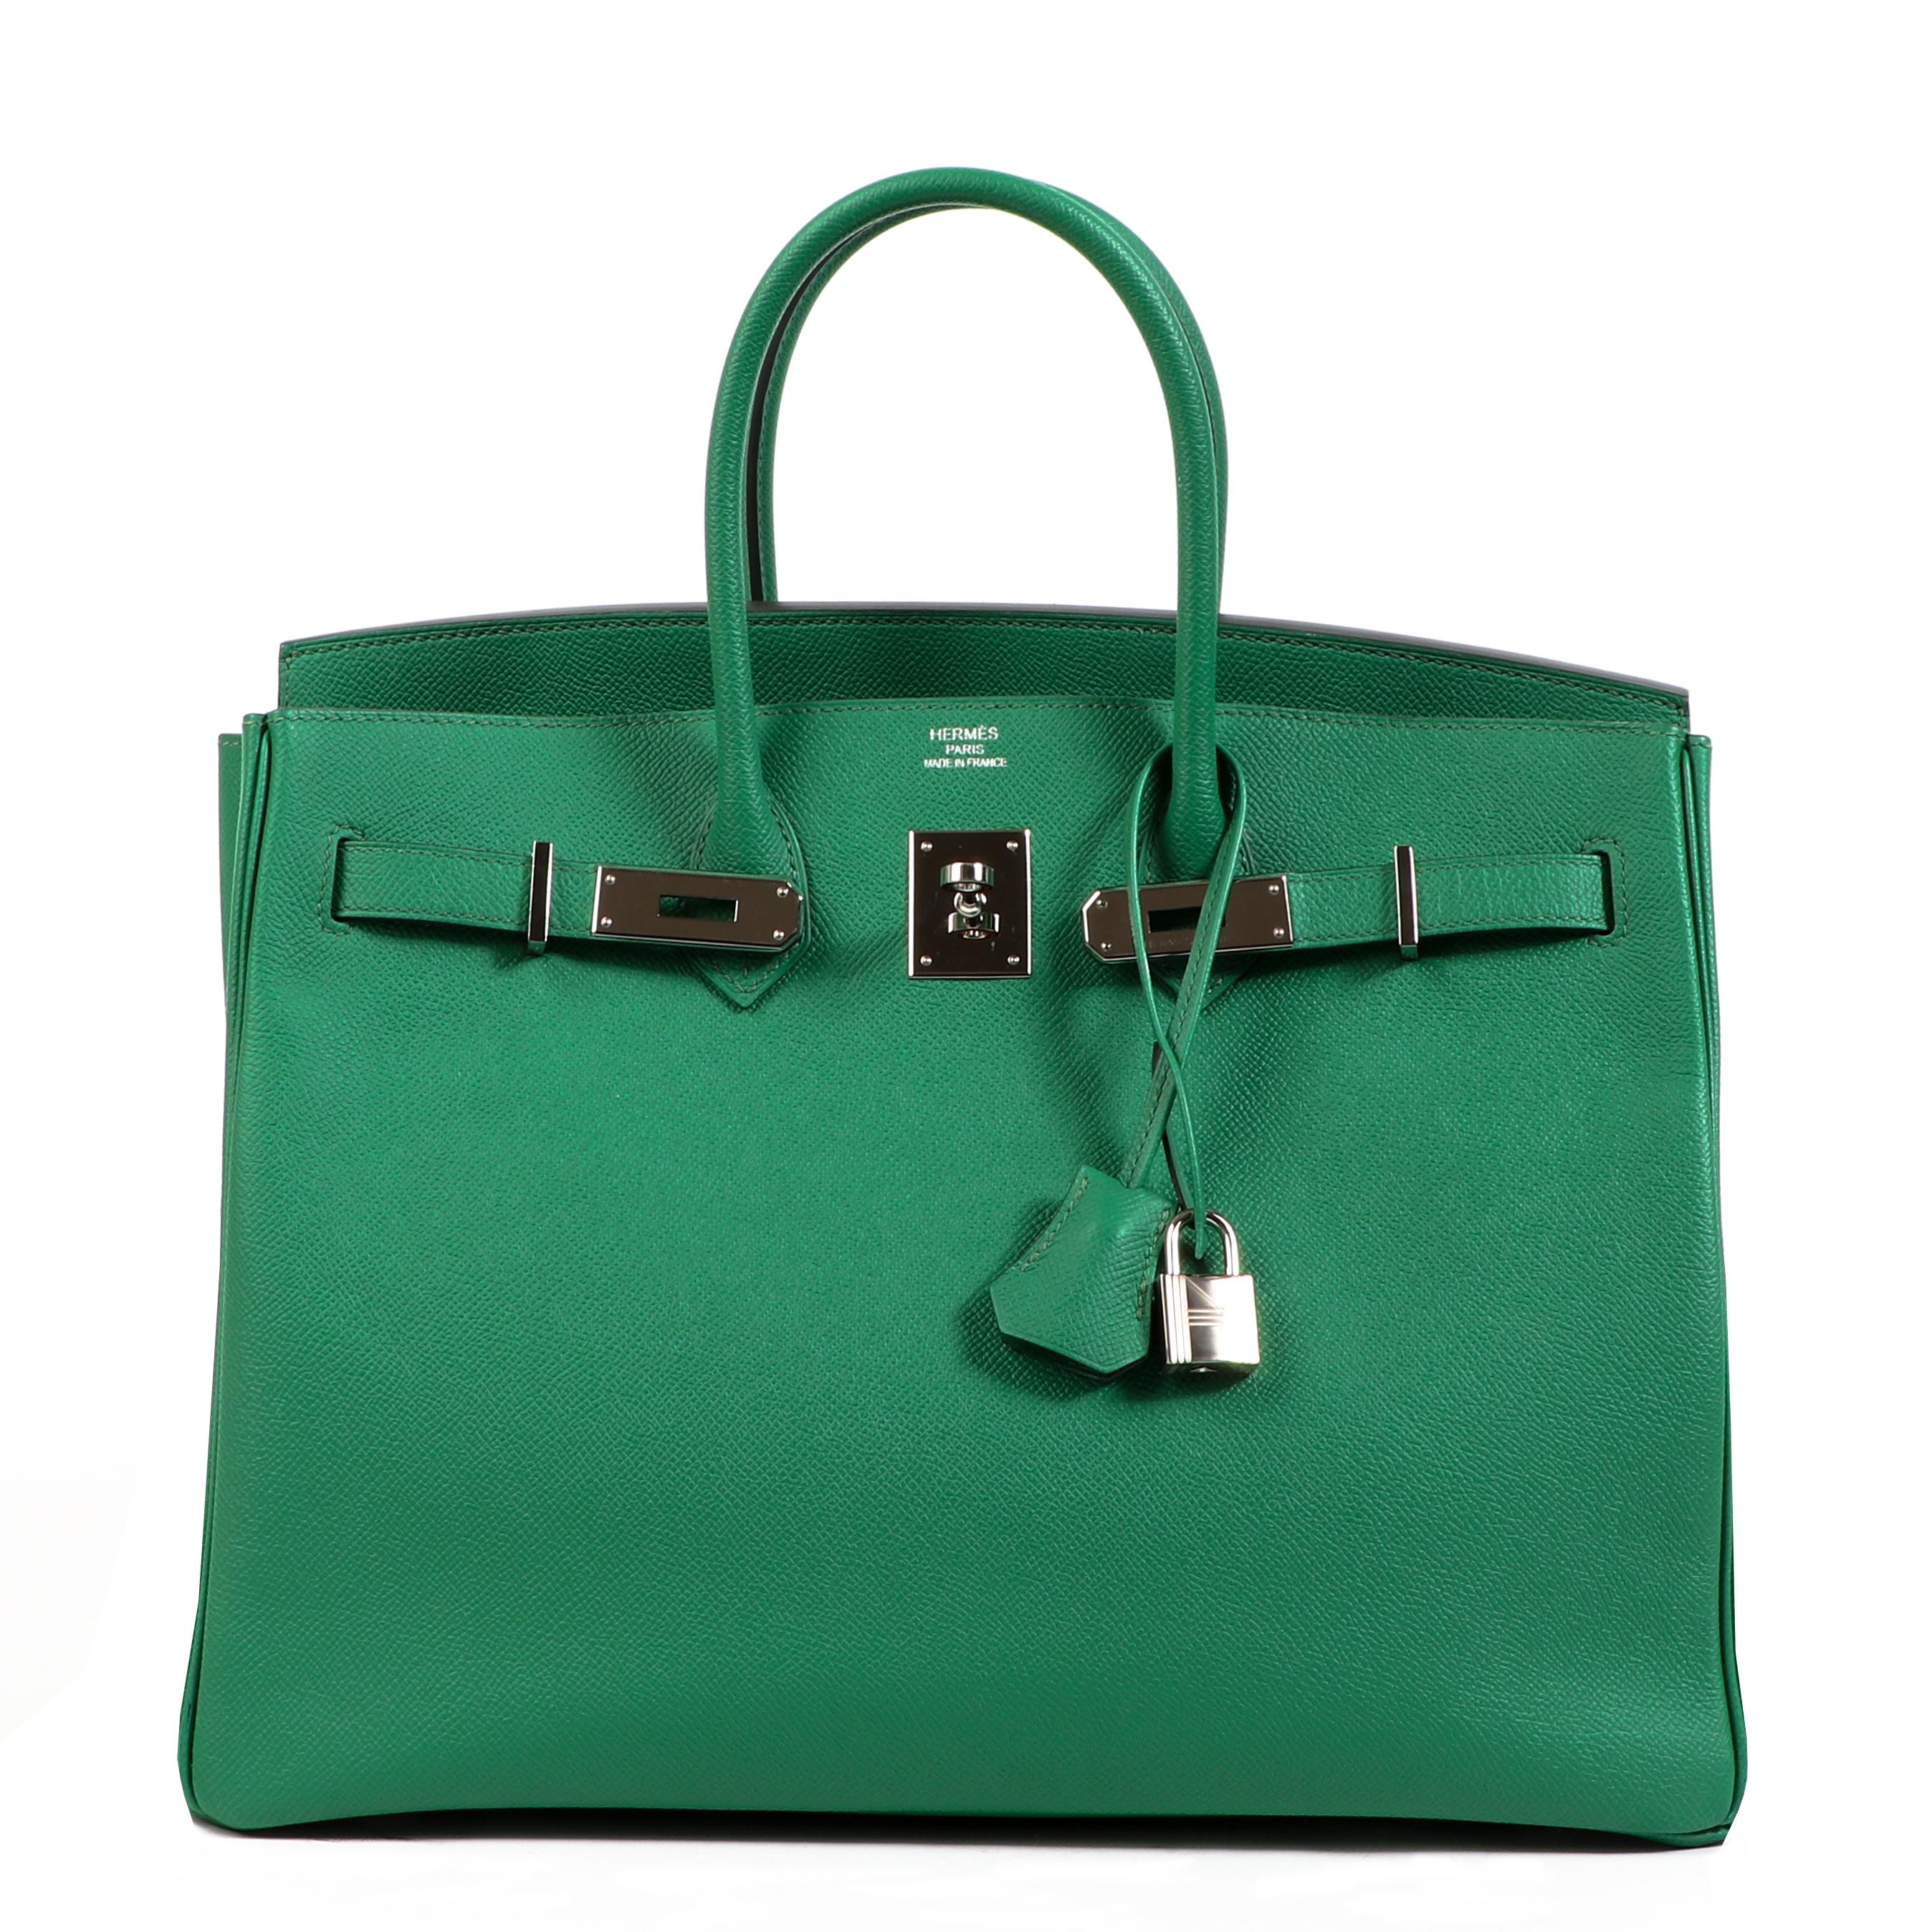 Hermès Birkin 35 Cactus Epsom Palladium Hardware

Everyone will be green with envy when you carry this Hermès Birkin 35 in Cactus green.

Made from Epsom leather, the bag has a slightly slouchy shape due to the Retourné finish. The palladium plated